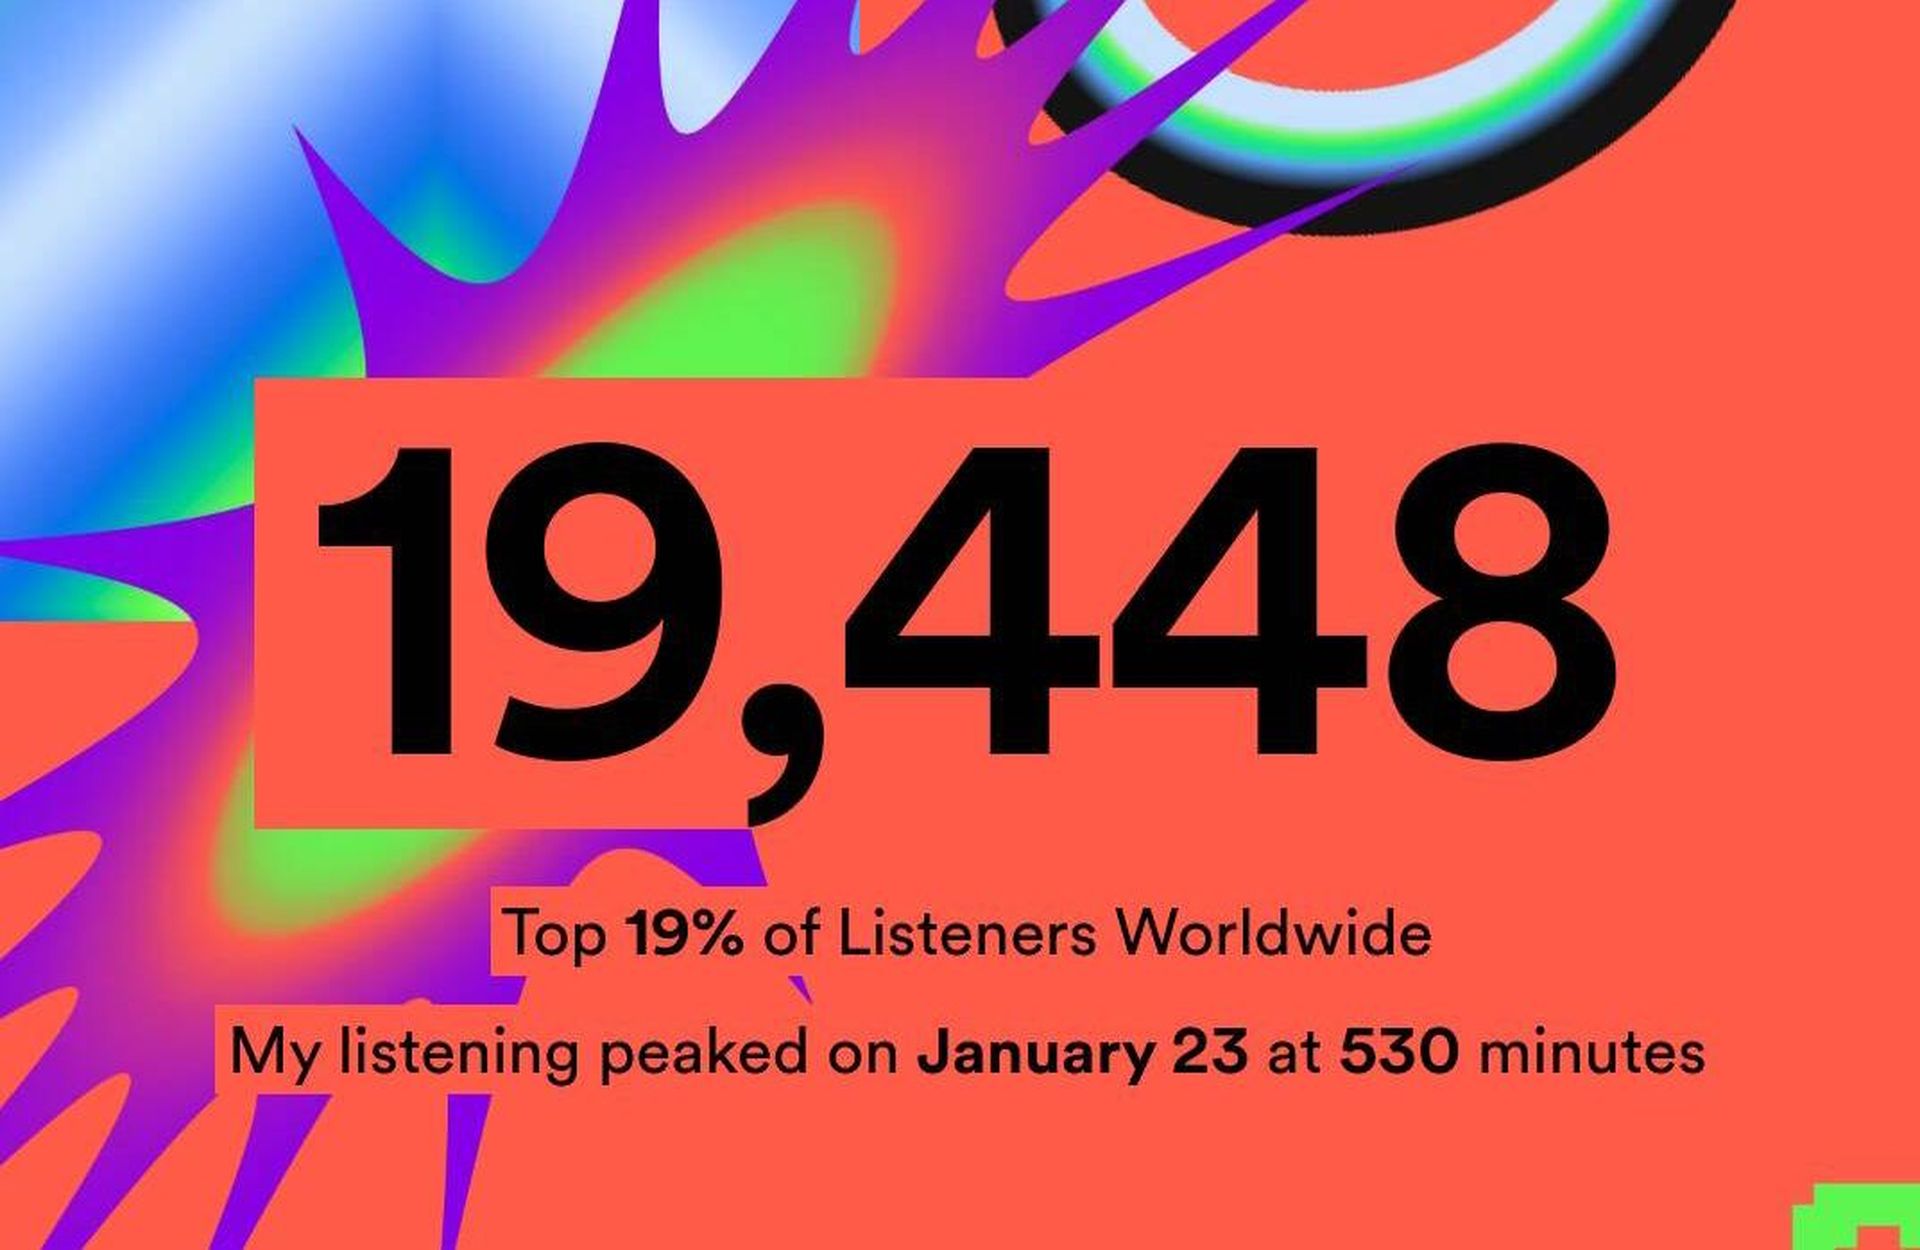 What is the average Spotify listening time?